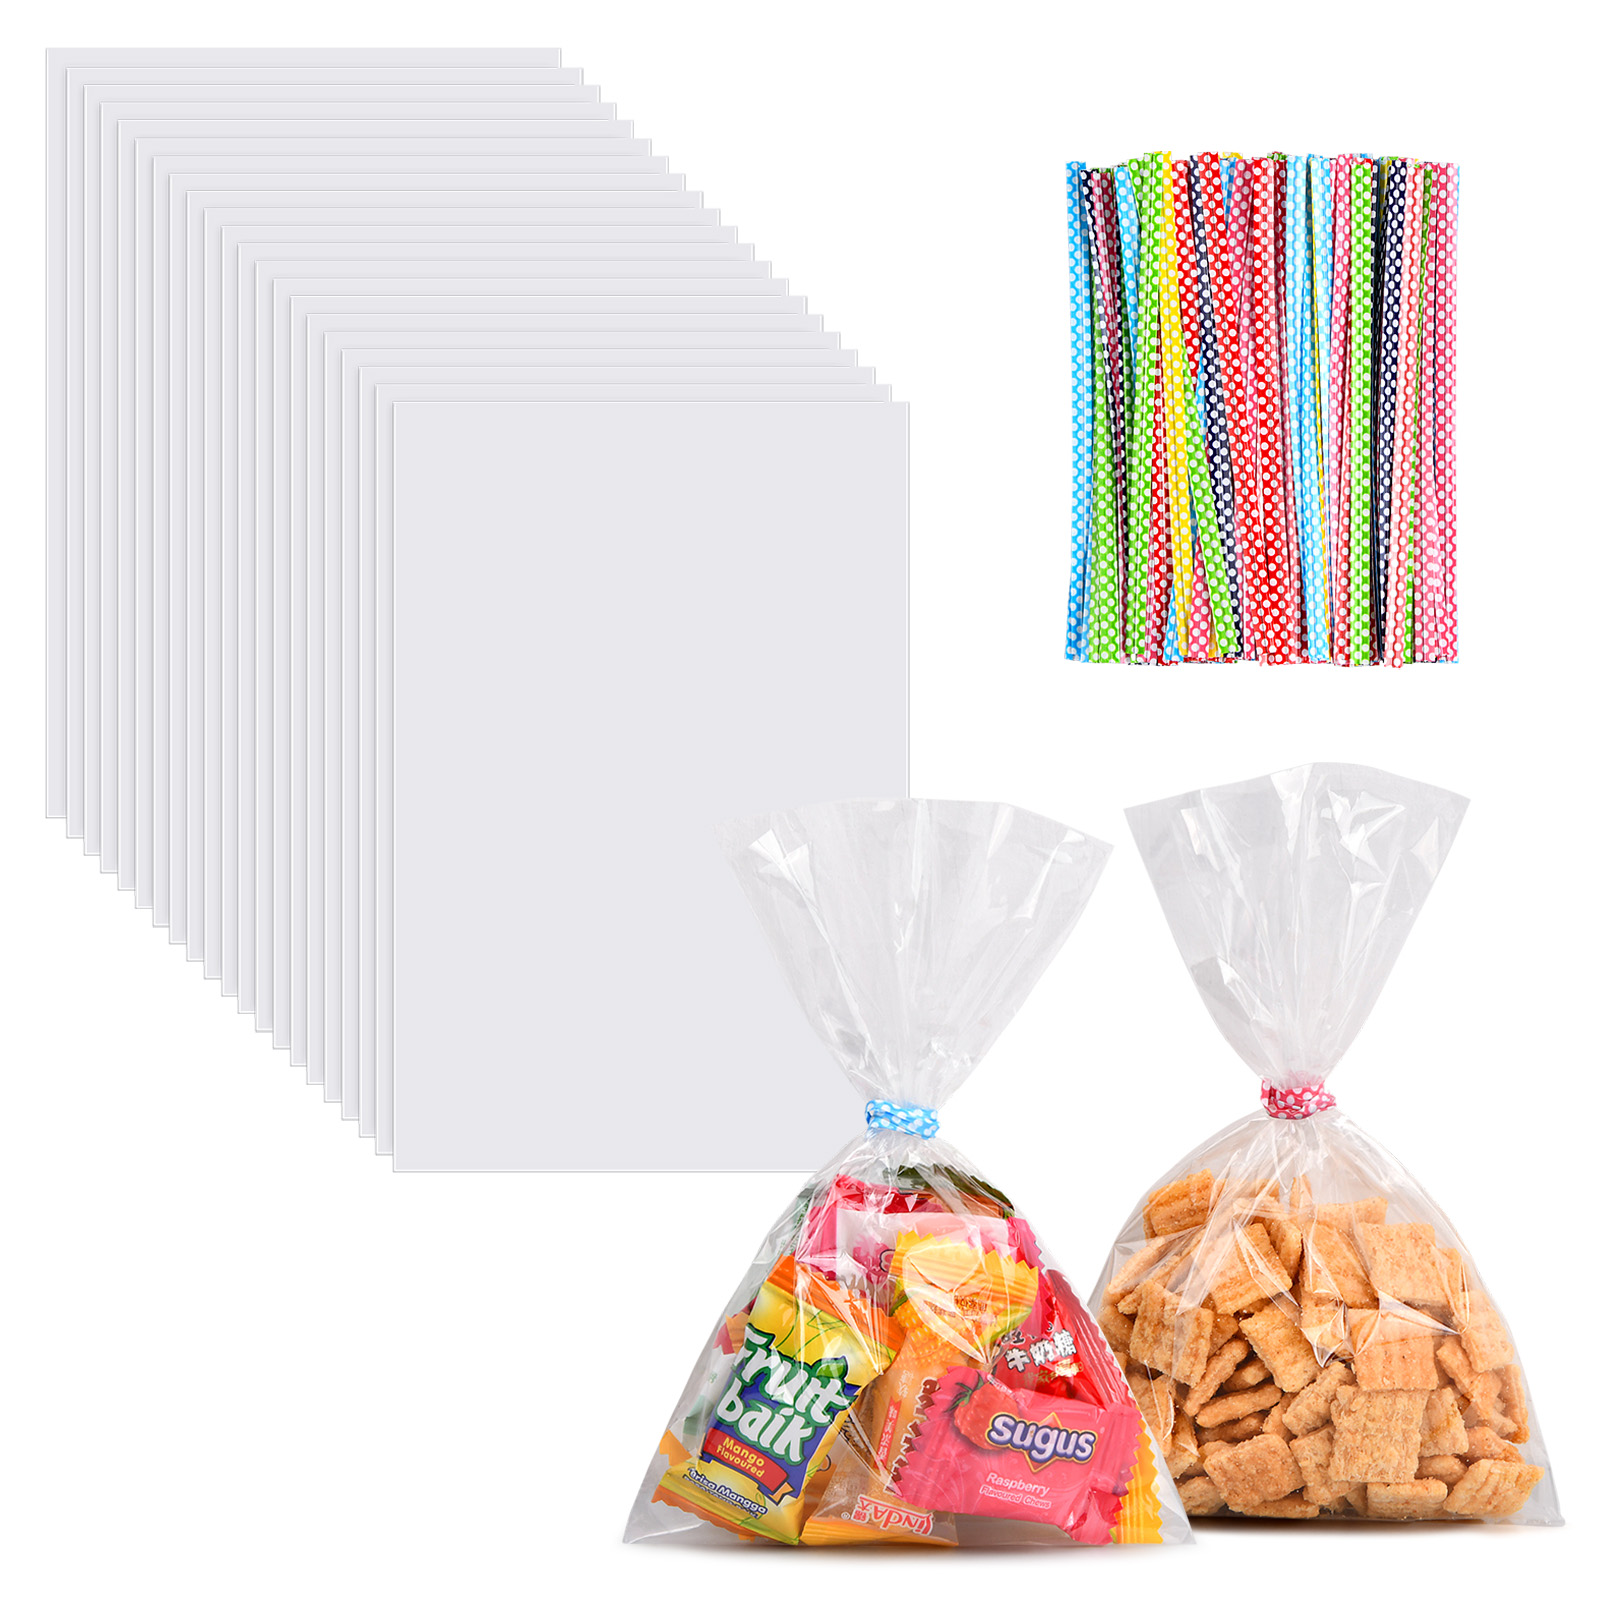 Simple Craft Candy Treat Cellophane Bags - 200 Pack (4 x 9 ), 200 - Kroger